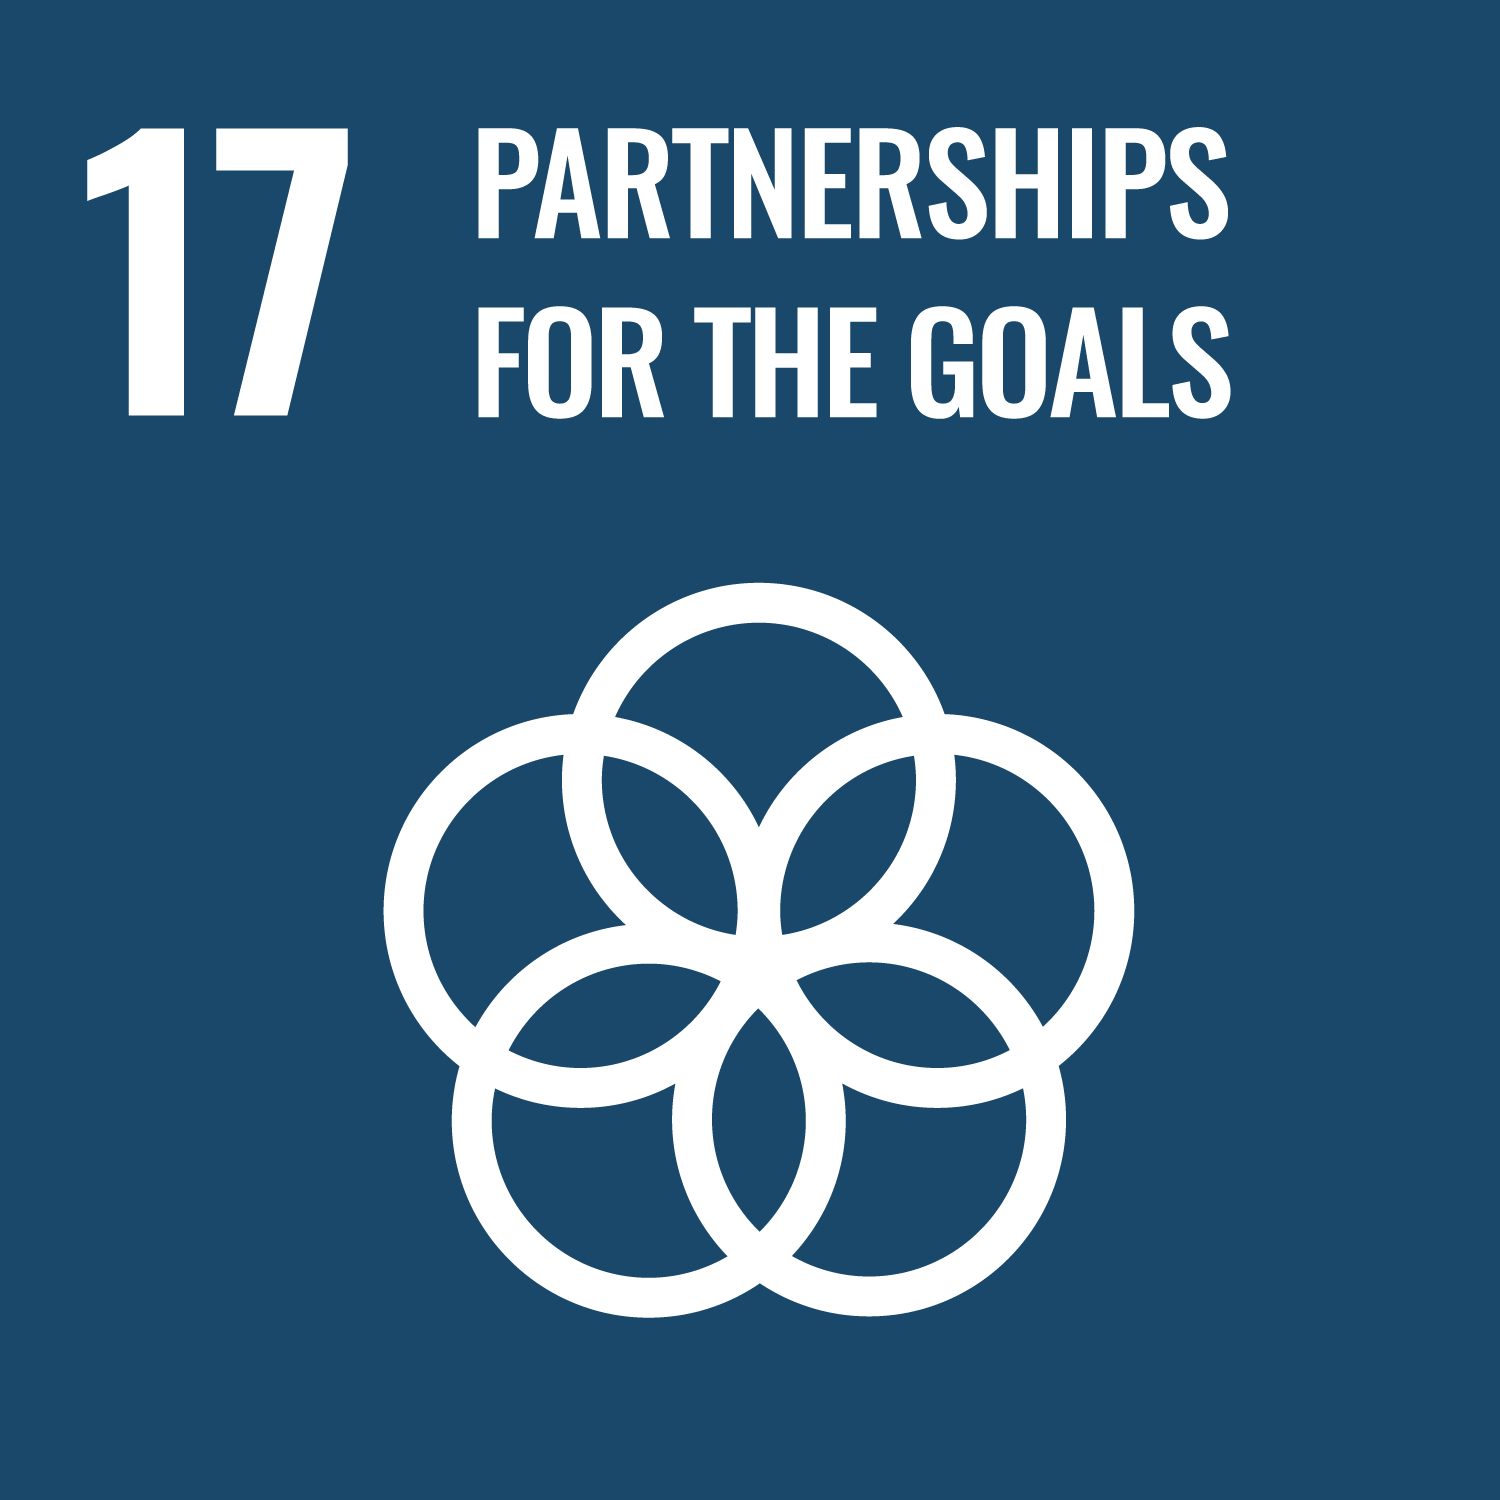 Revitalize the global partnership for sustainable development 